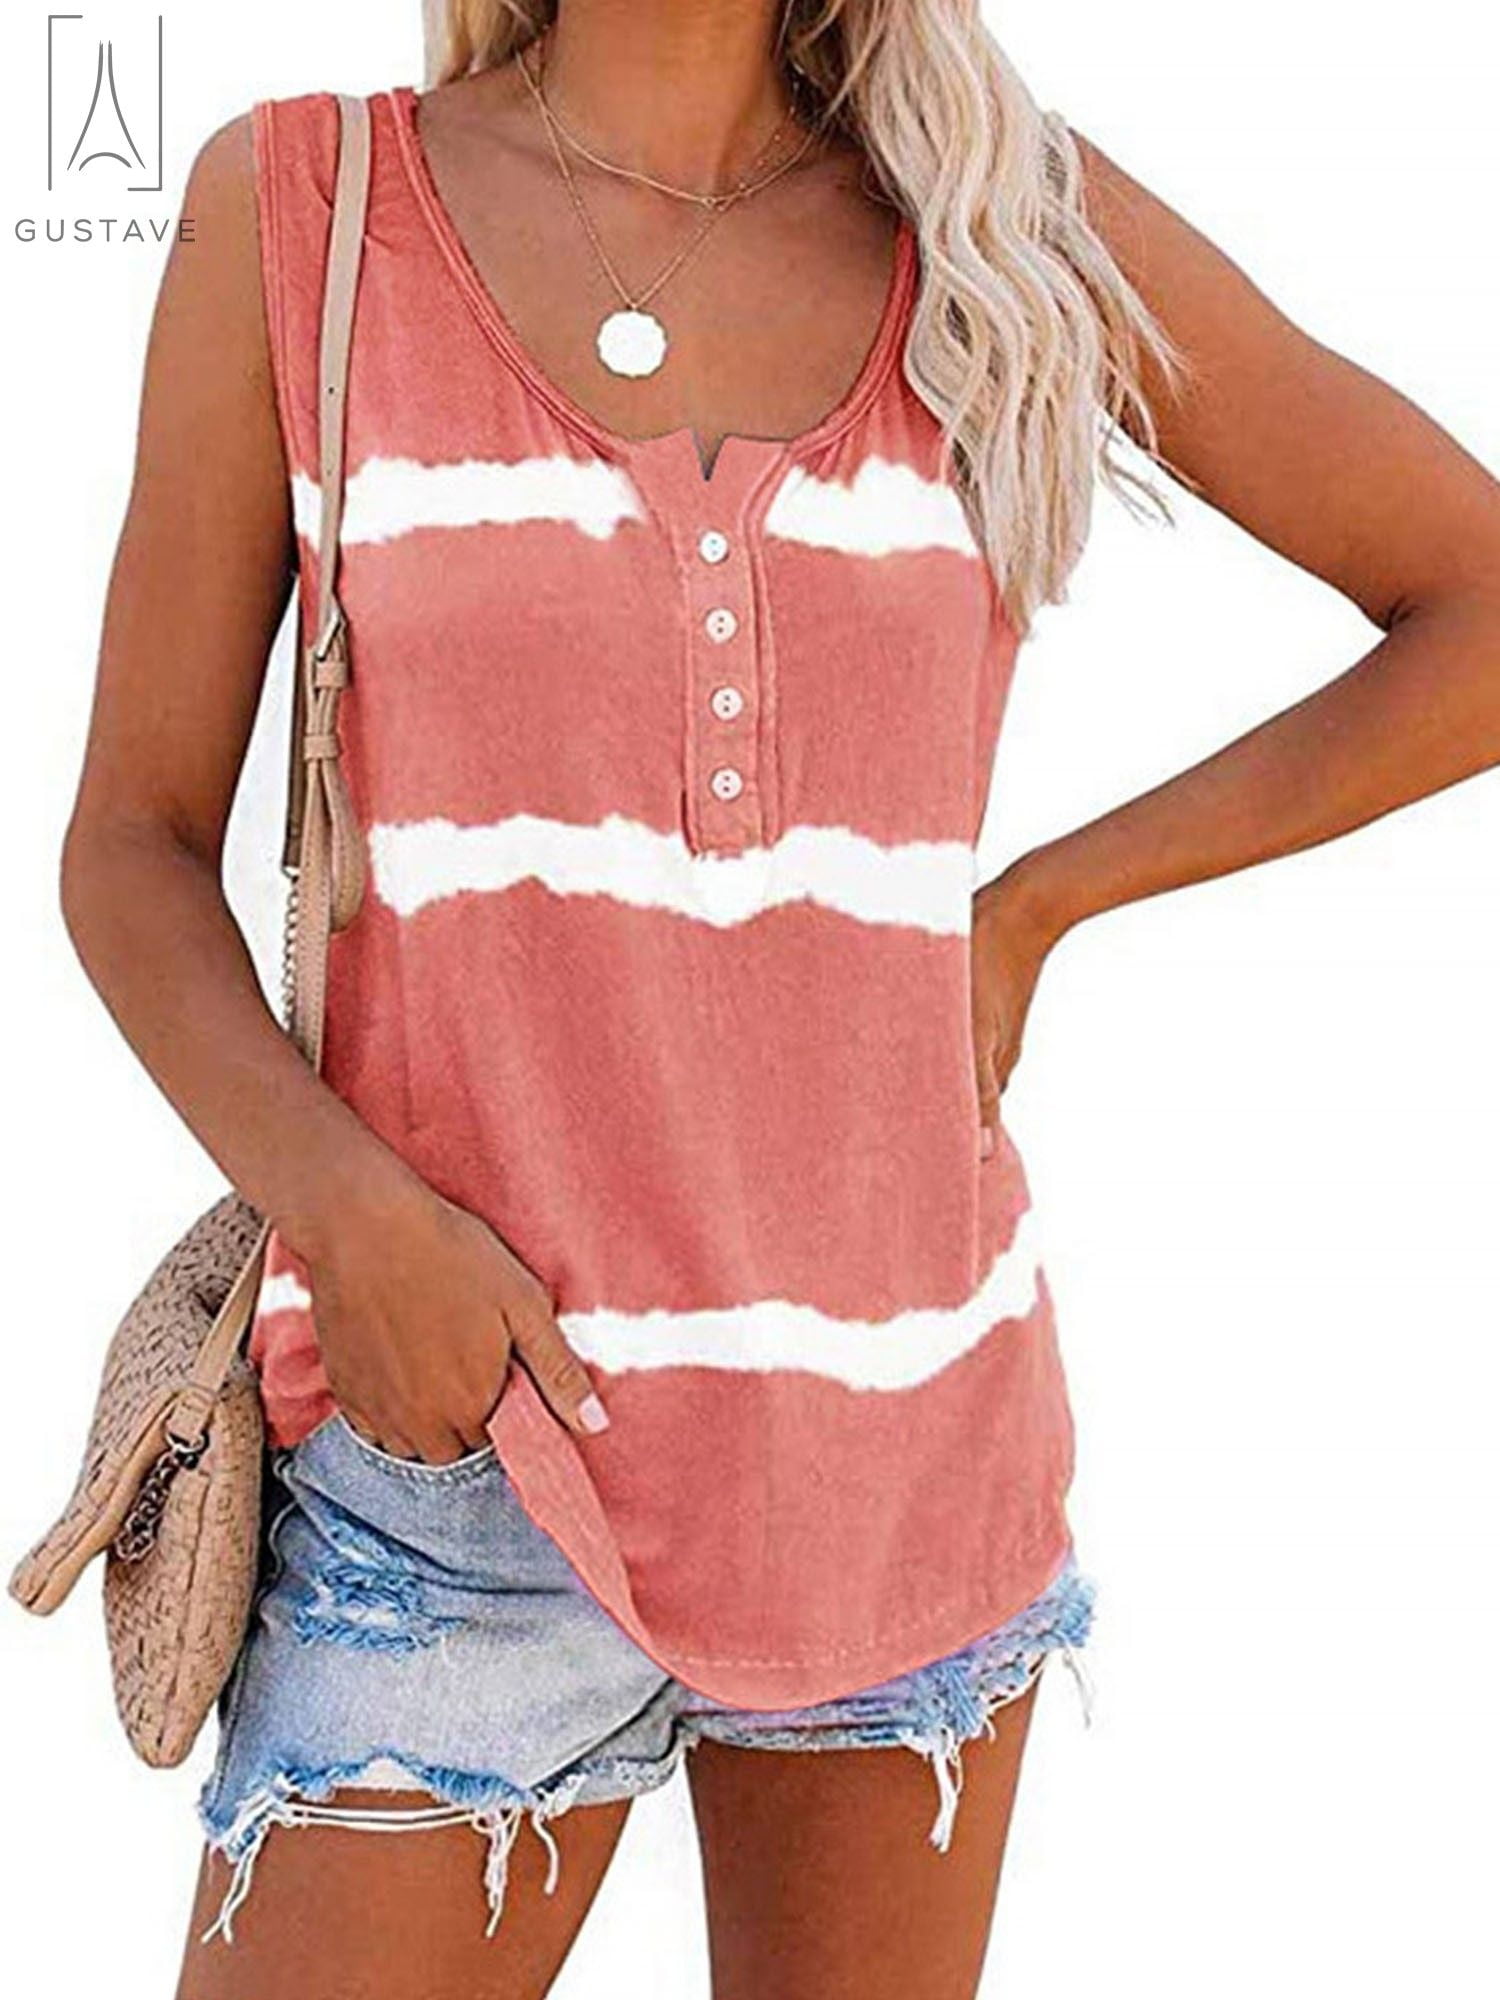 Summer Tie Dye Tank Tops for Women Casual Sleeveless Loose Fit Cut Out Keyhole Back Tank Tees Shirts Blouses Vest 